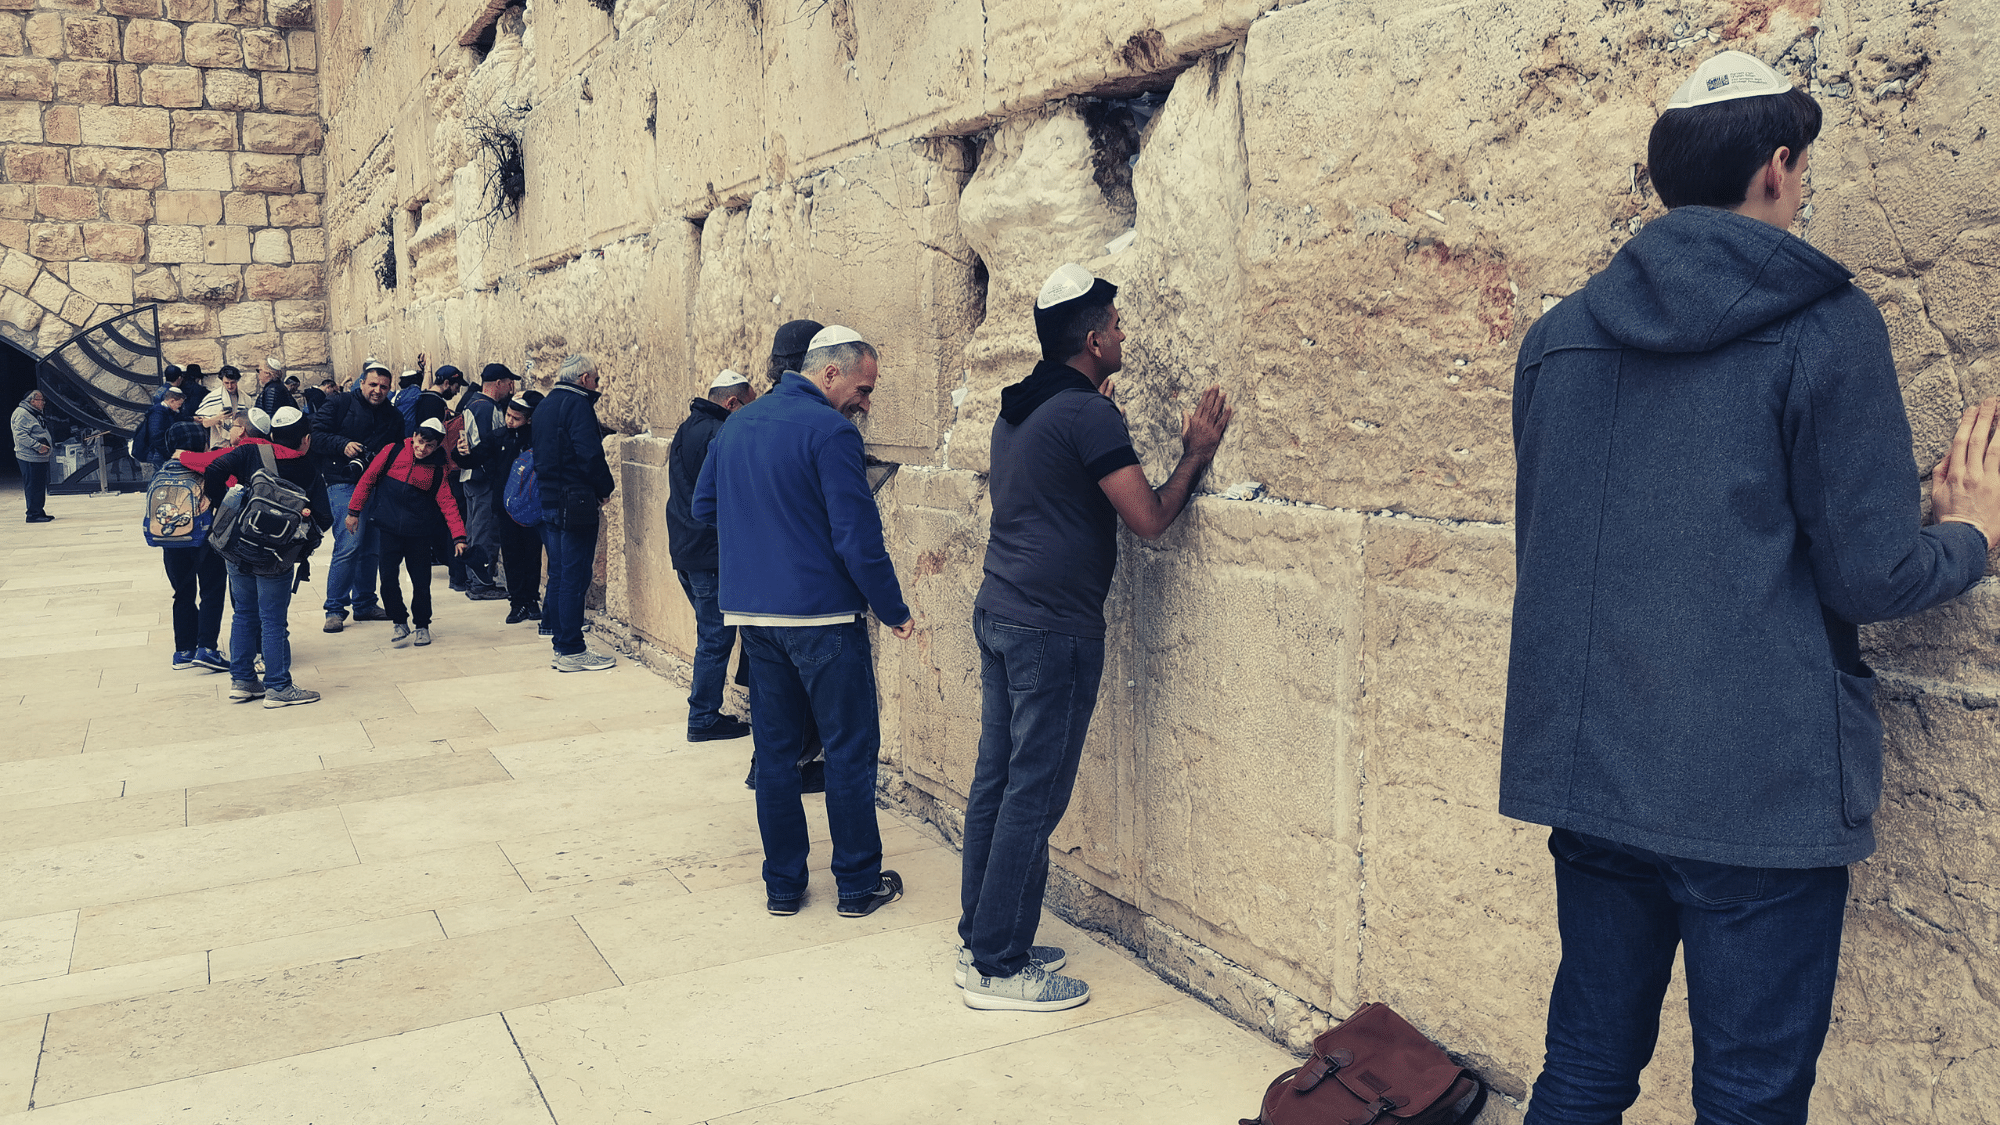 At the wailing wall or the Western Wall, one of Judaism’s holiest sites.